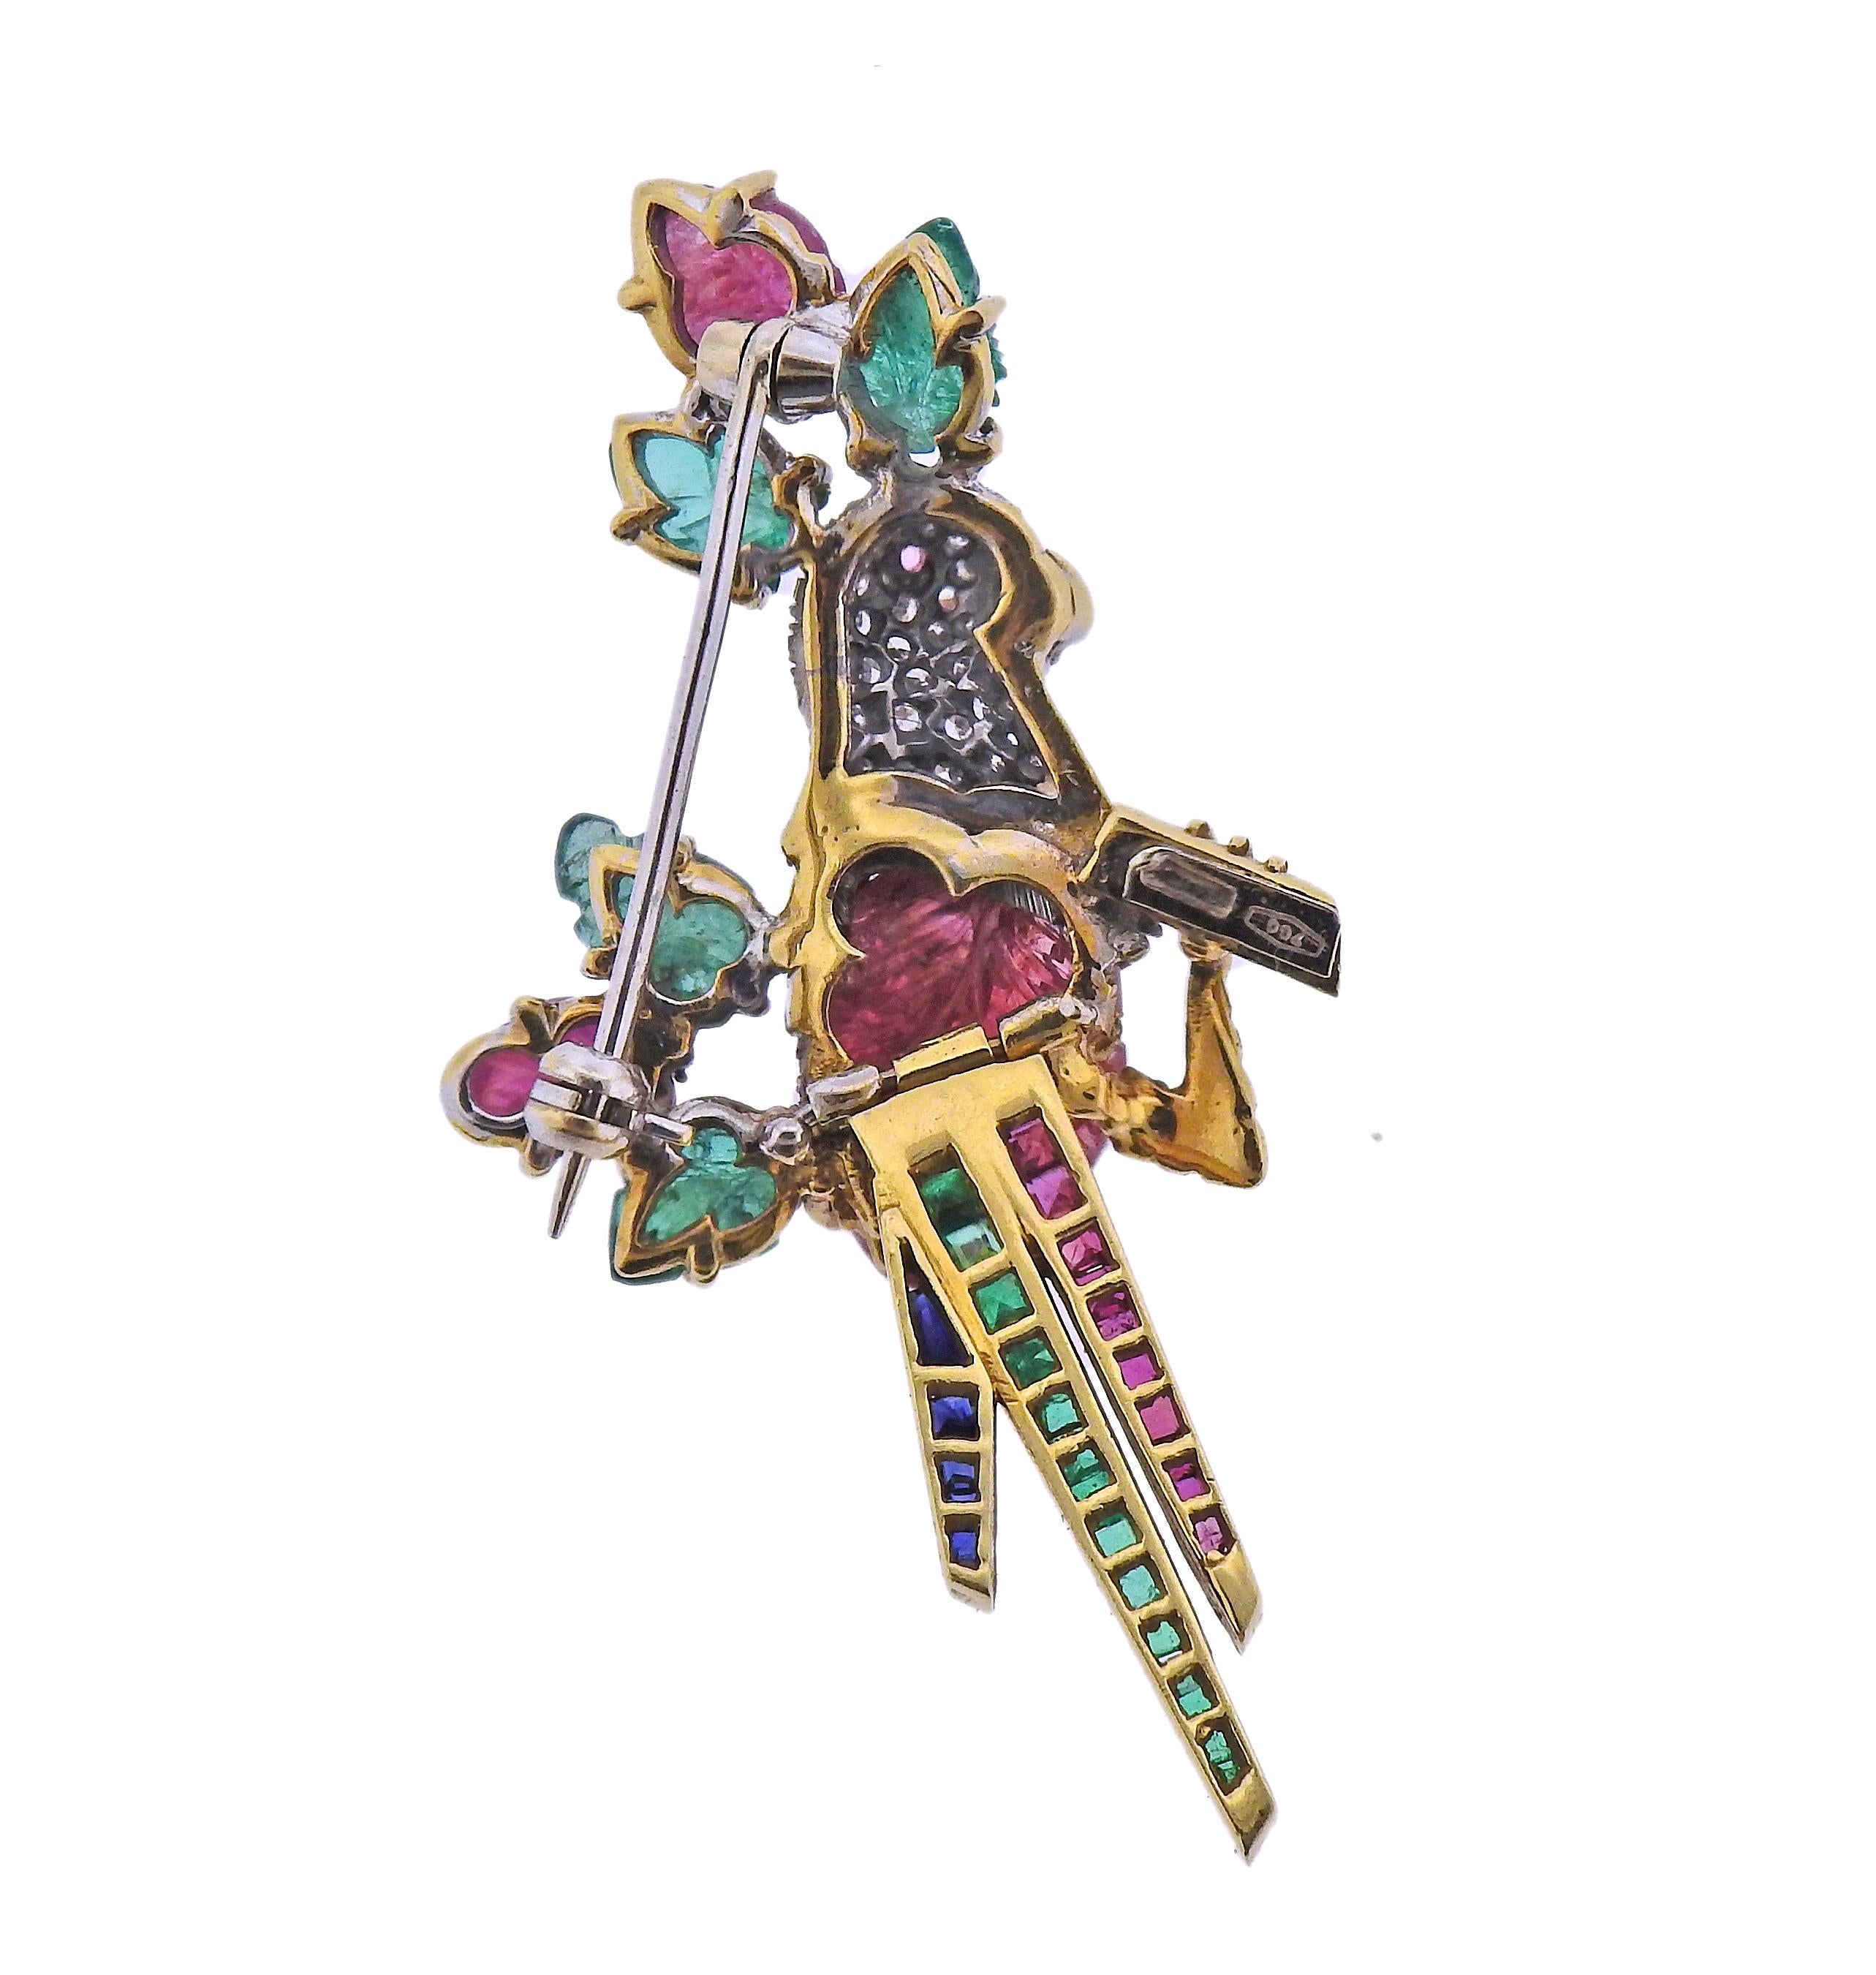 Italian made 18k gold bird brooch, with movable tail. Adorned with carved rubies, emeralds and approx. 0.40ctw in diamonds. Brooch measures 2 1/8